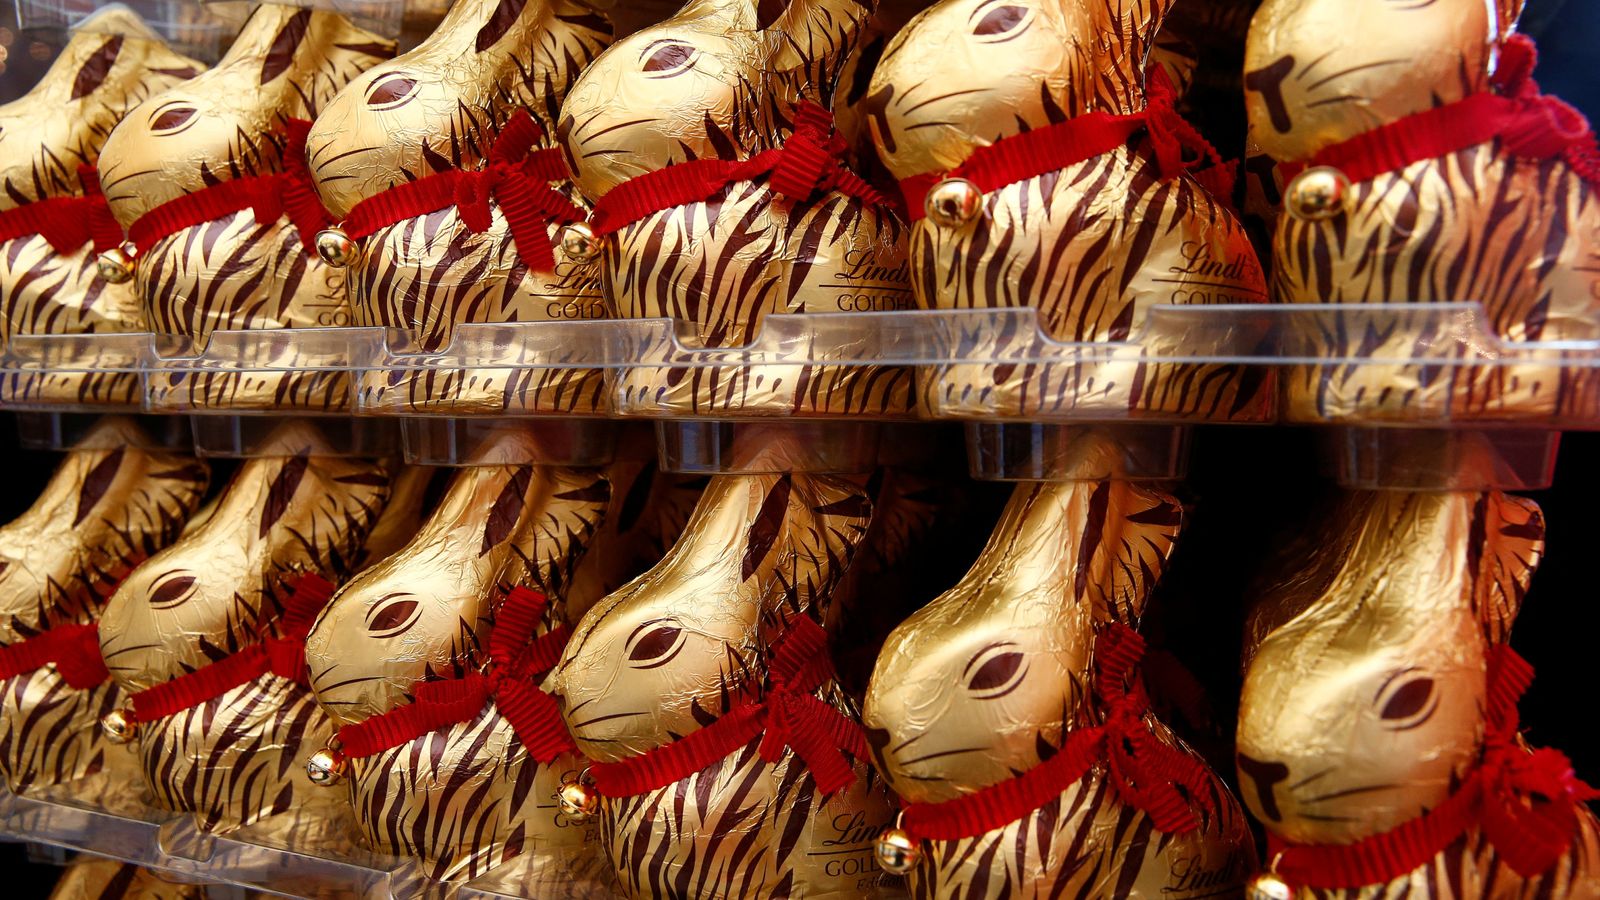 Lindt's bunny won out over its rival from Lidl